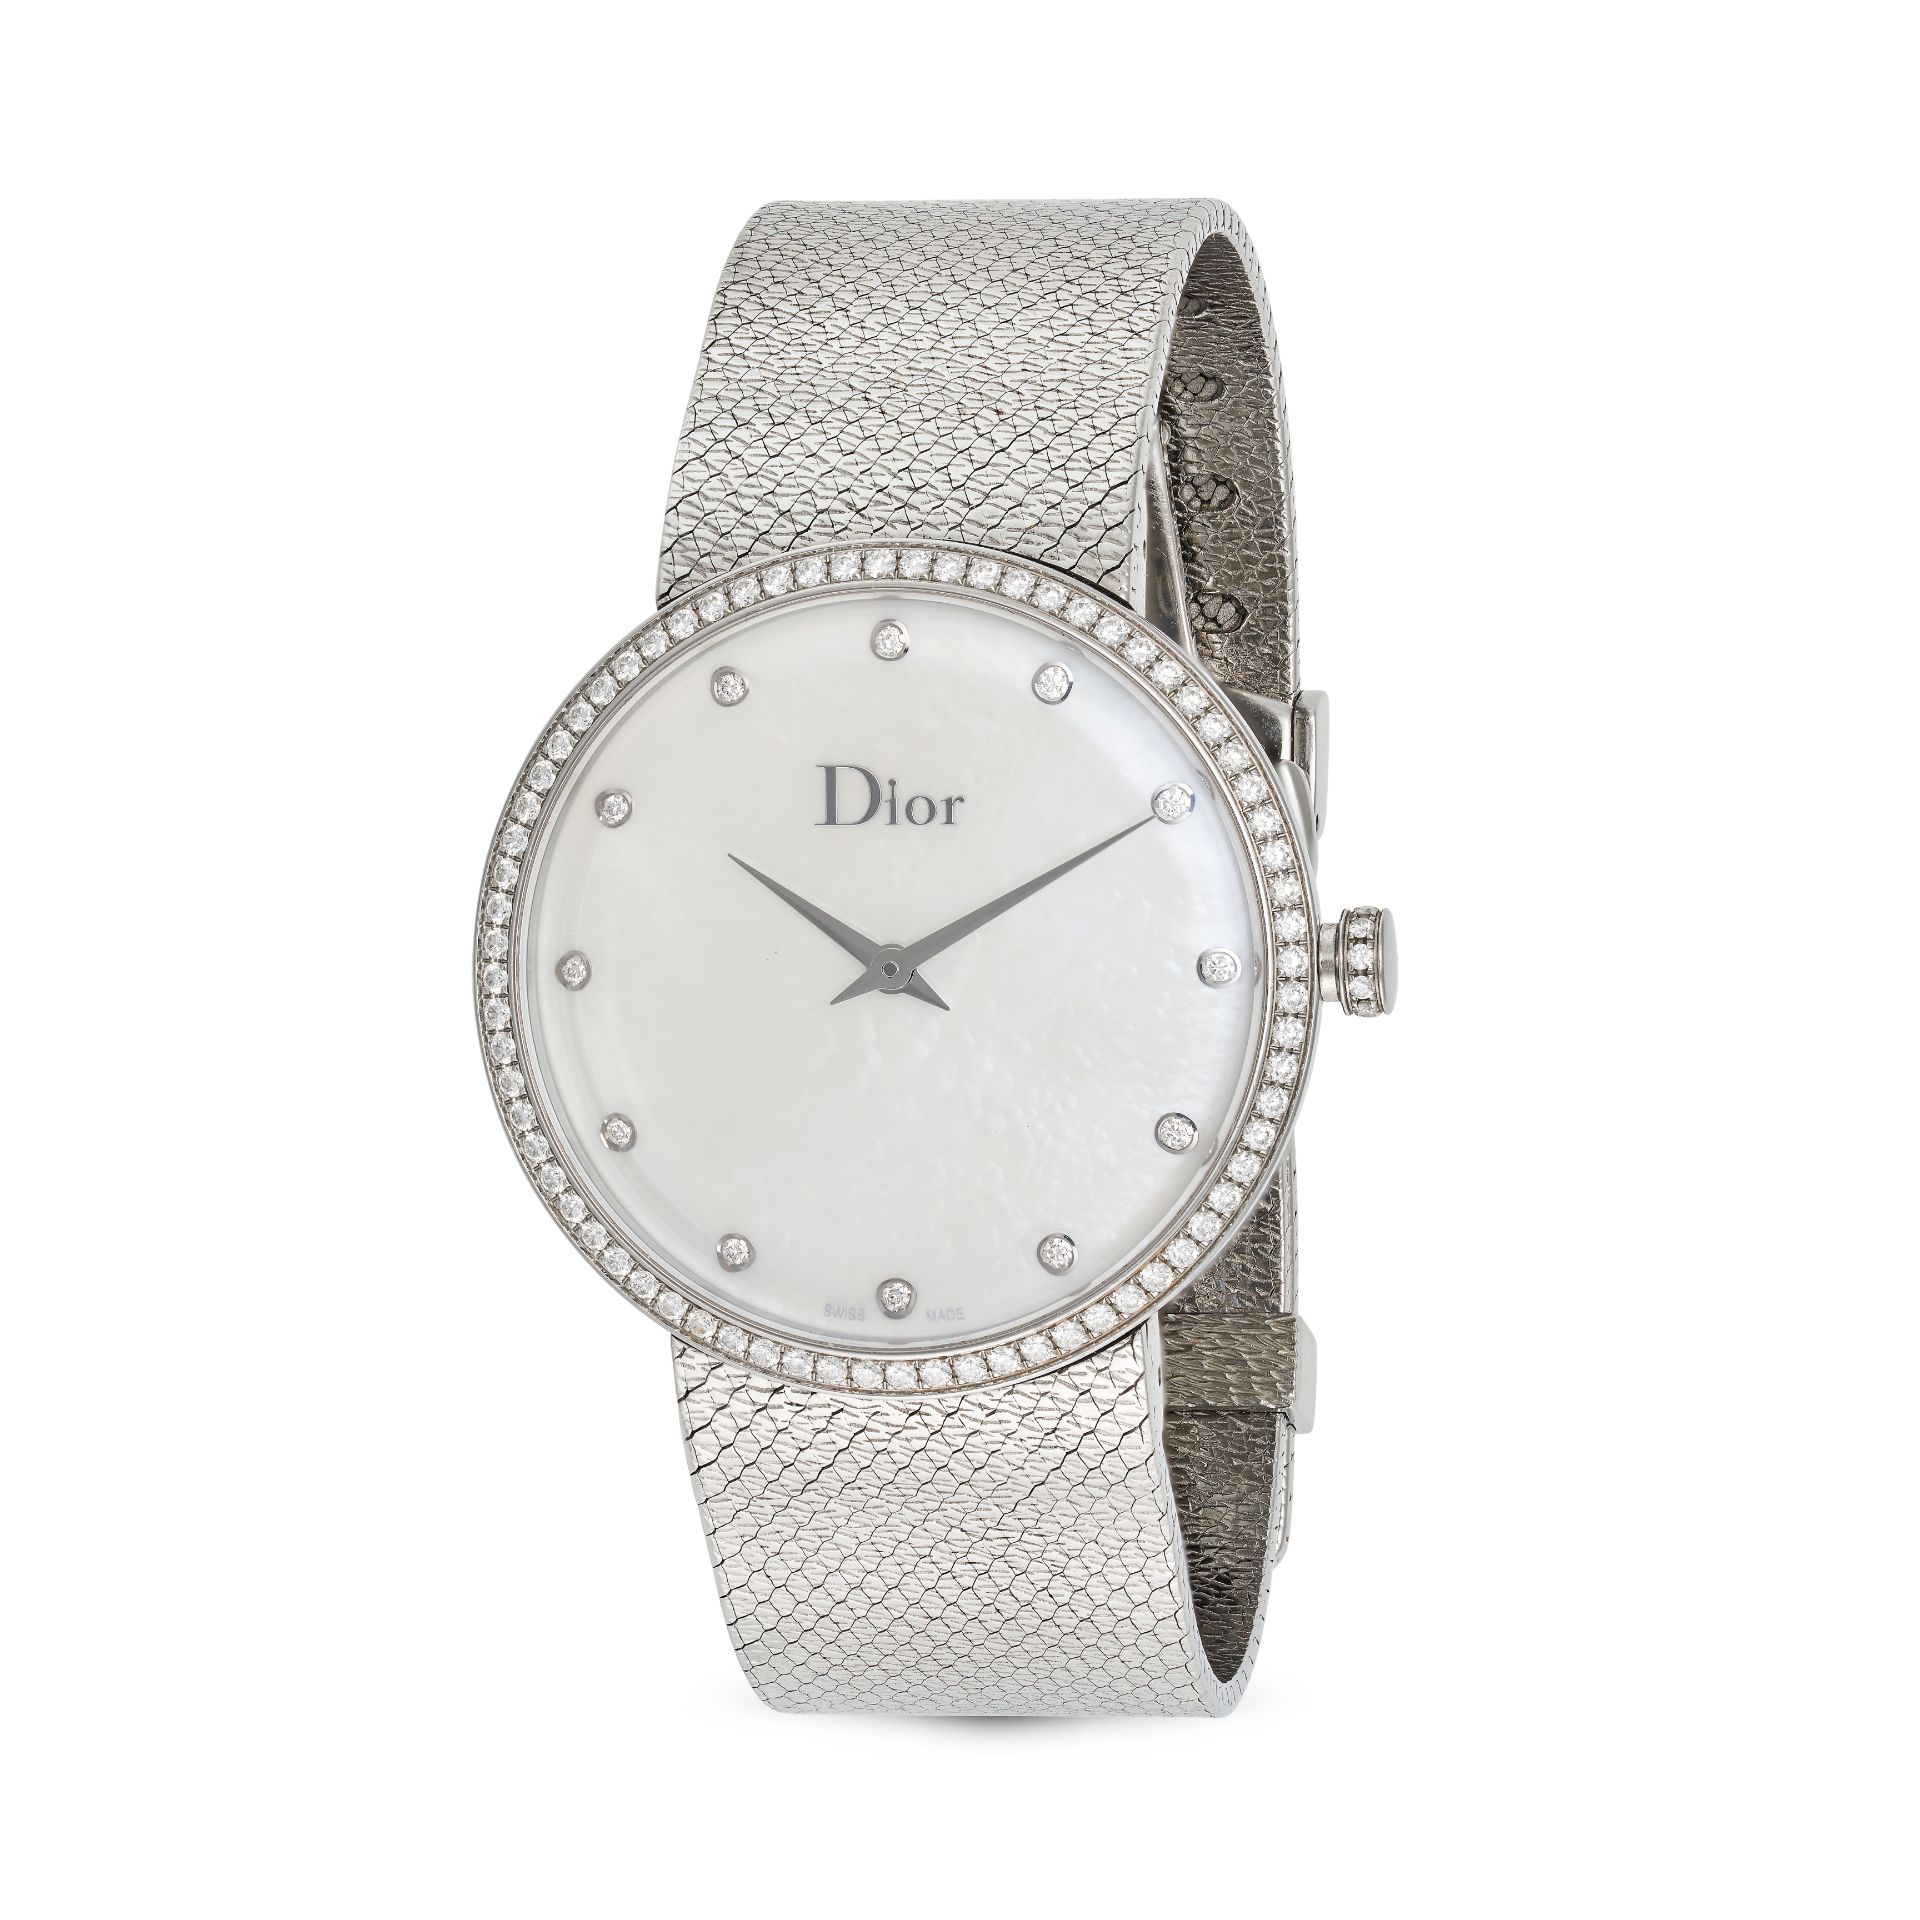 DIOR - A DIAMOND DIOR WRISTWATCH in stainless steel, FR8772, quartz movement, the circular mother...